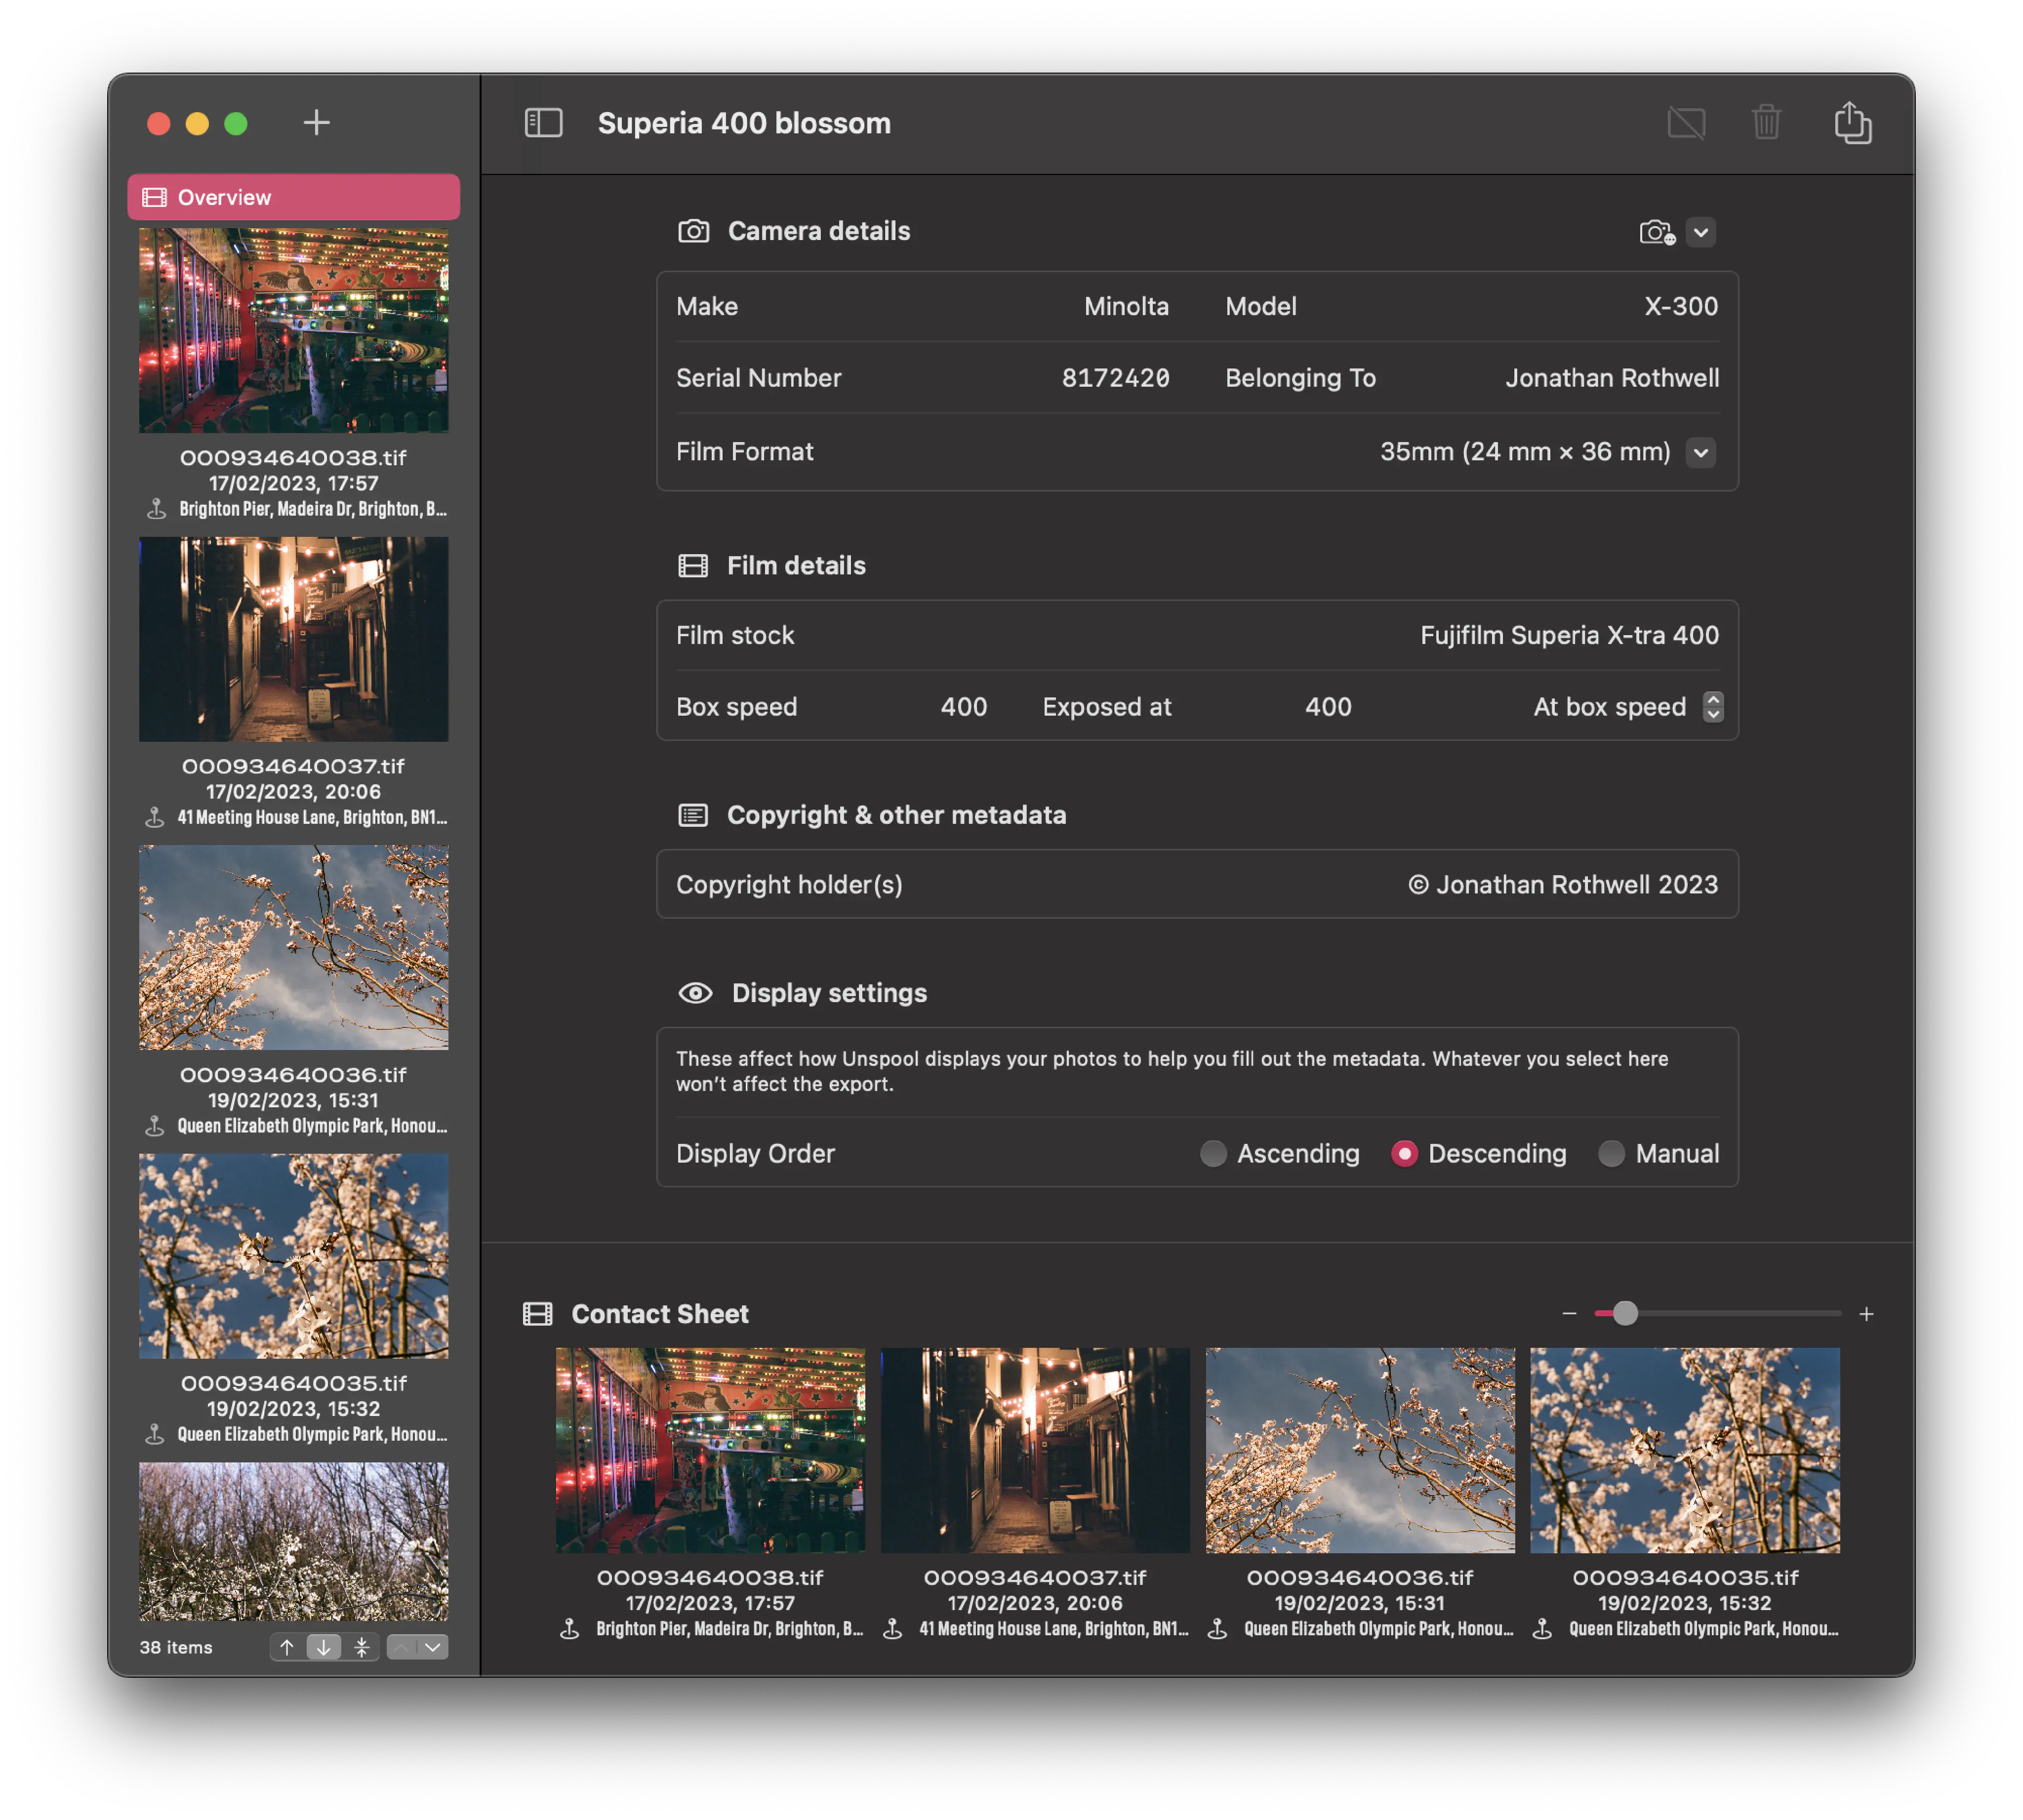 A screenshot of a Mac app called “Unspool”, showing a two-pane sidebar-detail layout in a document called “Superia 400 blossom”. In the sidebar are images, with their filenames, and dates and locations, along with an “Overview” option, and controls for sorting the images (which are of a fairground ride in Brighton, a street at night, and trees in blossom.) The Overview option is selected in the sidebar. On the right is a form with details about the camera (a Minolta X-300 belonging to Jonathan Rothwell) and also the film (35mm Fujifilm Superia X-tra 400, shot at ISO 400/box speed) and with the copyright assigned to Jonathan Rothwell.